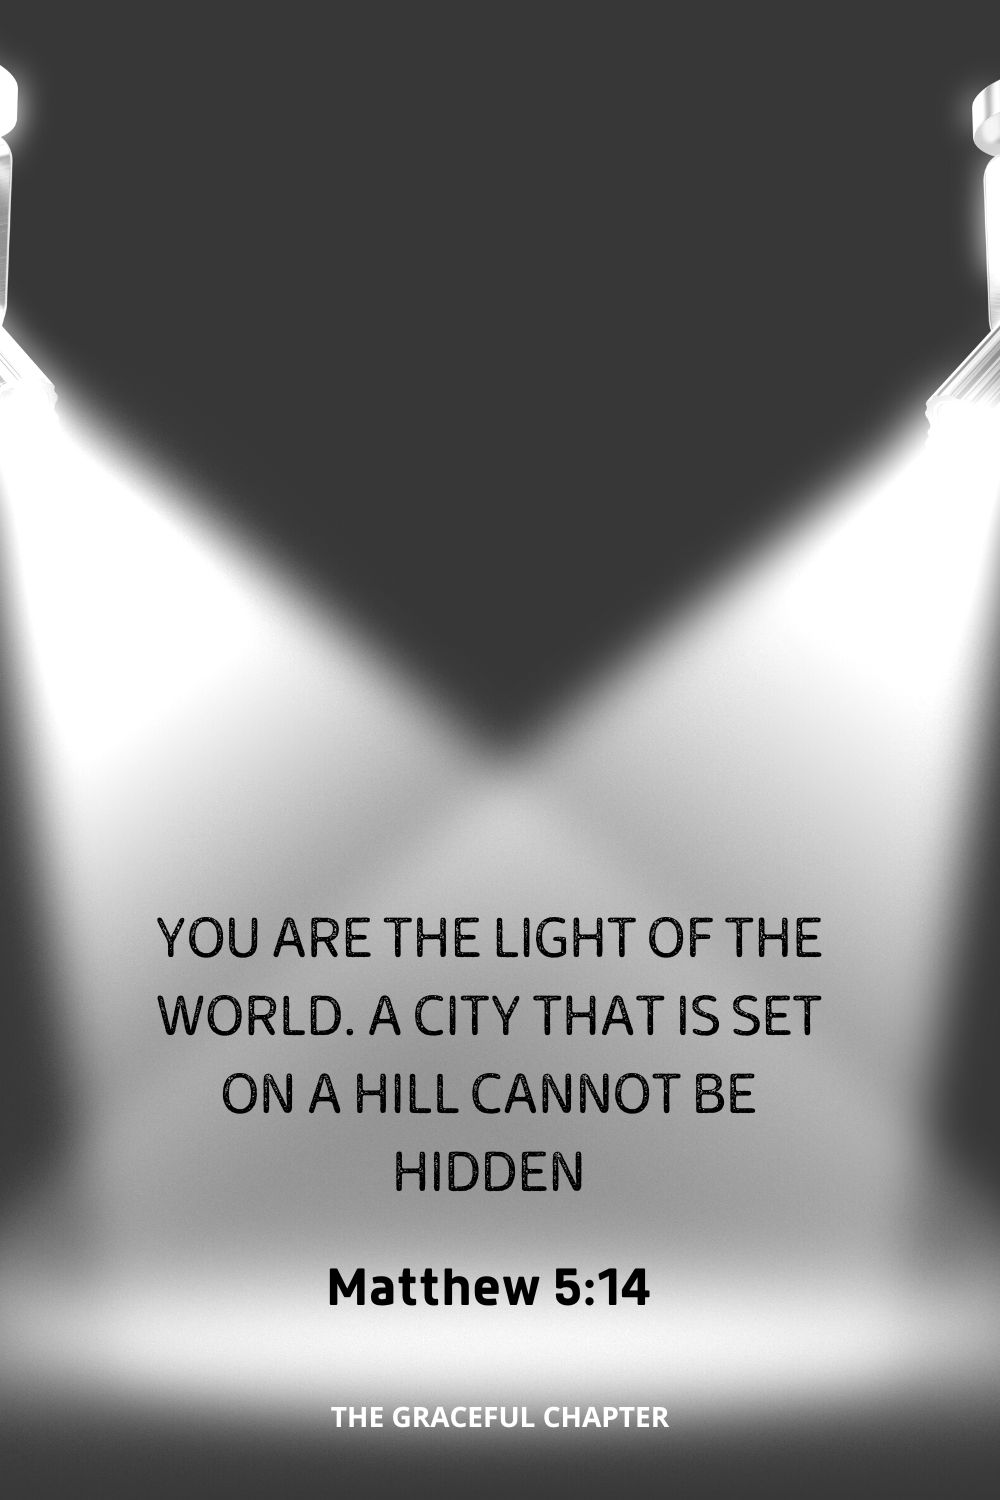 You are the light of the world. A city that is set on a hill cannot be hidden